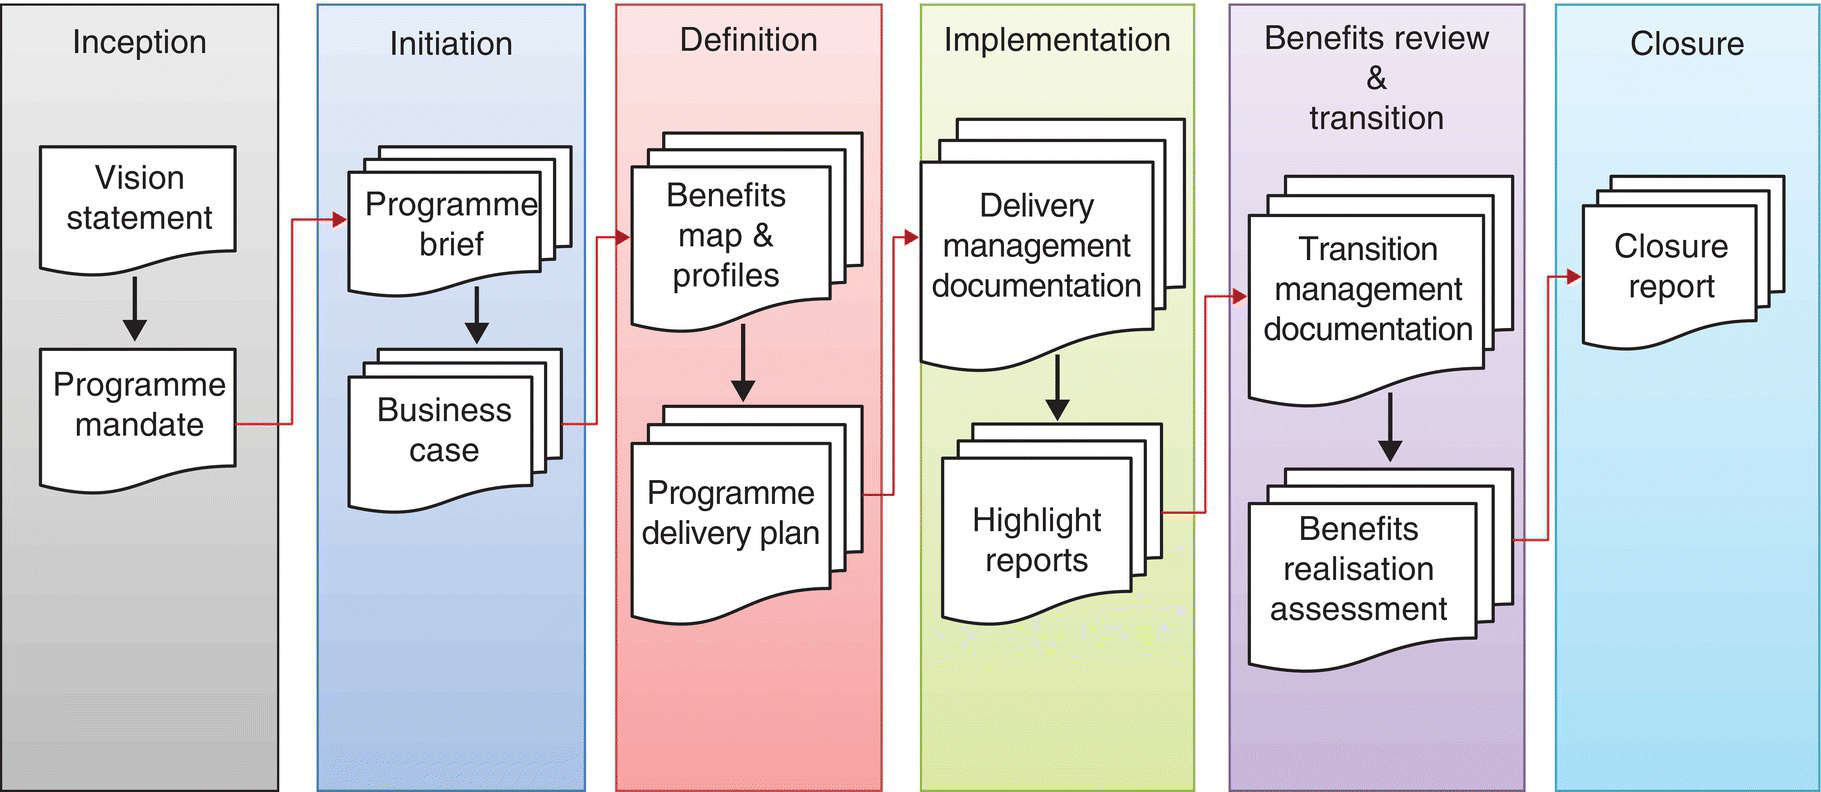 Diagram of key output document at each stage, displaying inception, initiation, definition, implementation, benefits review and transition, and closure.